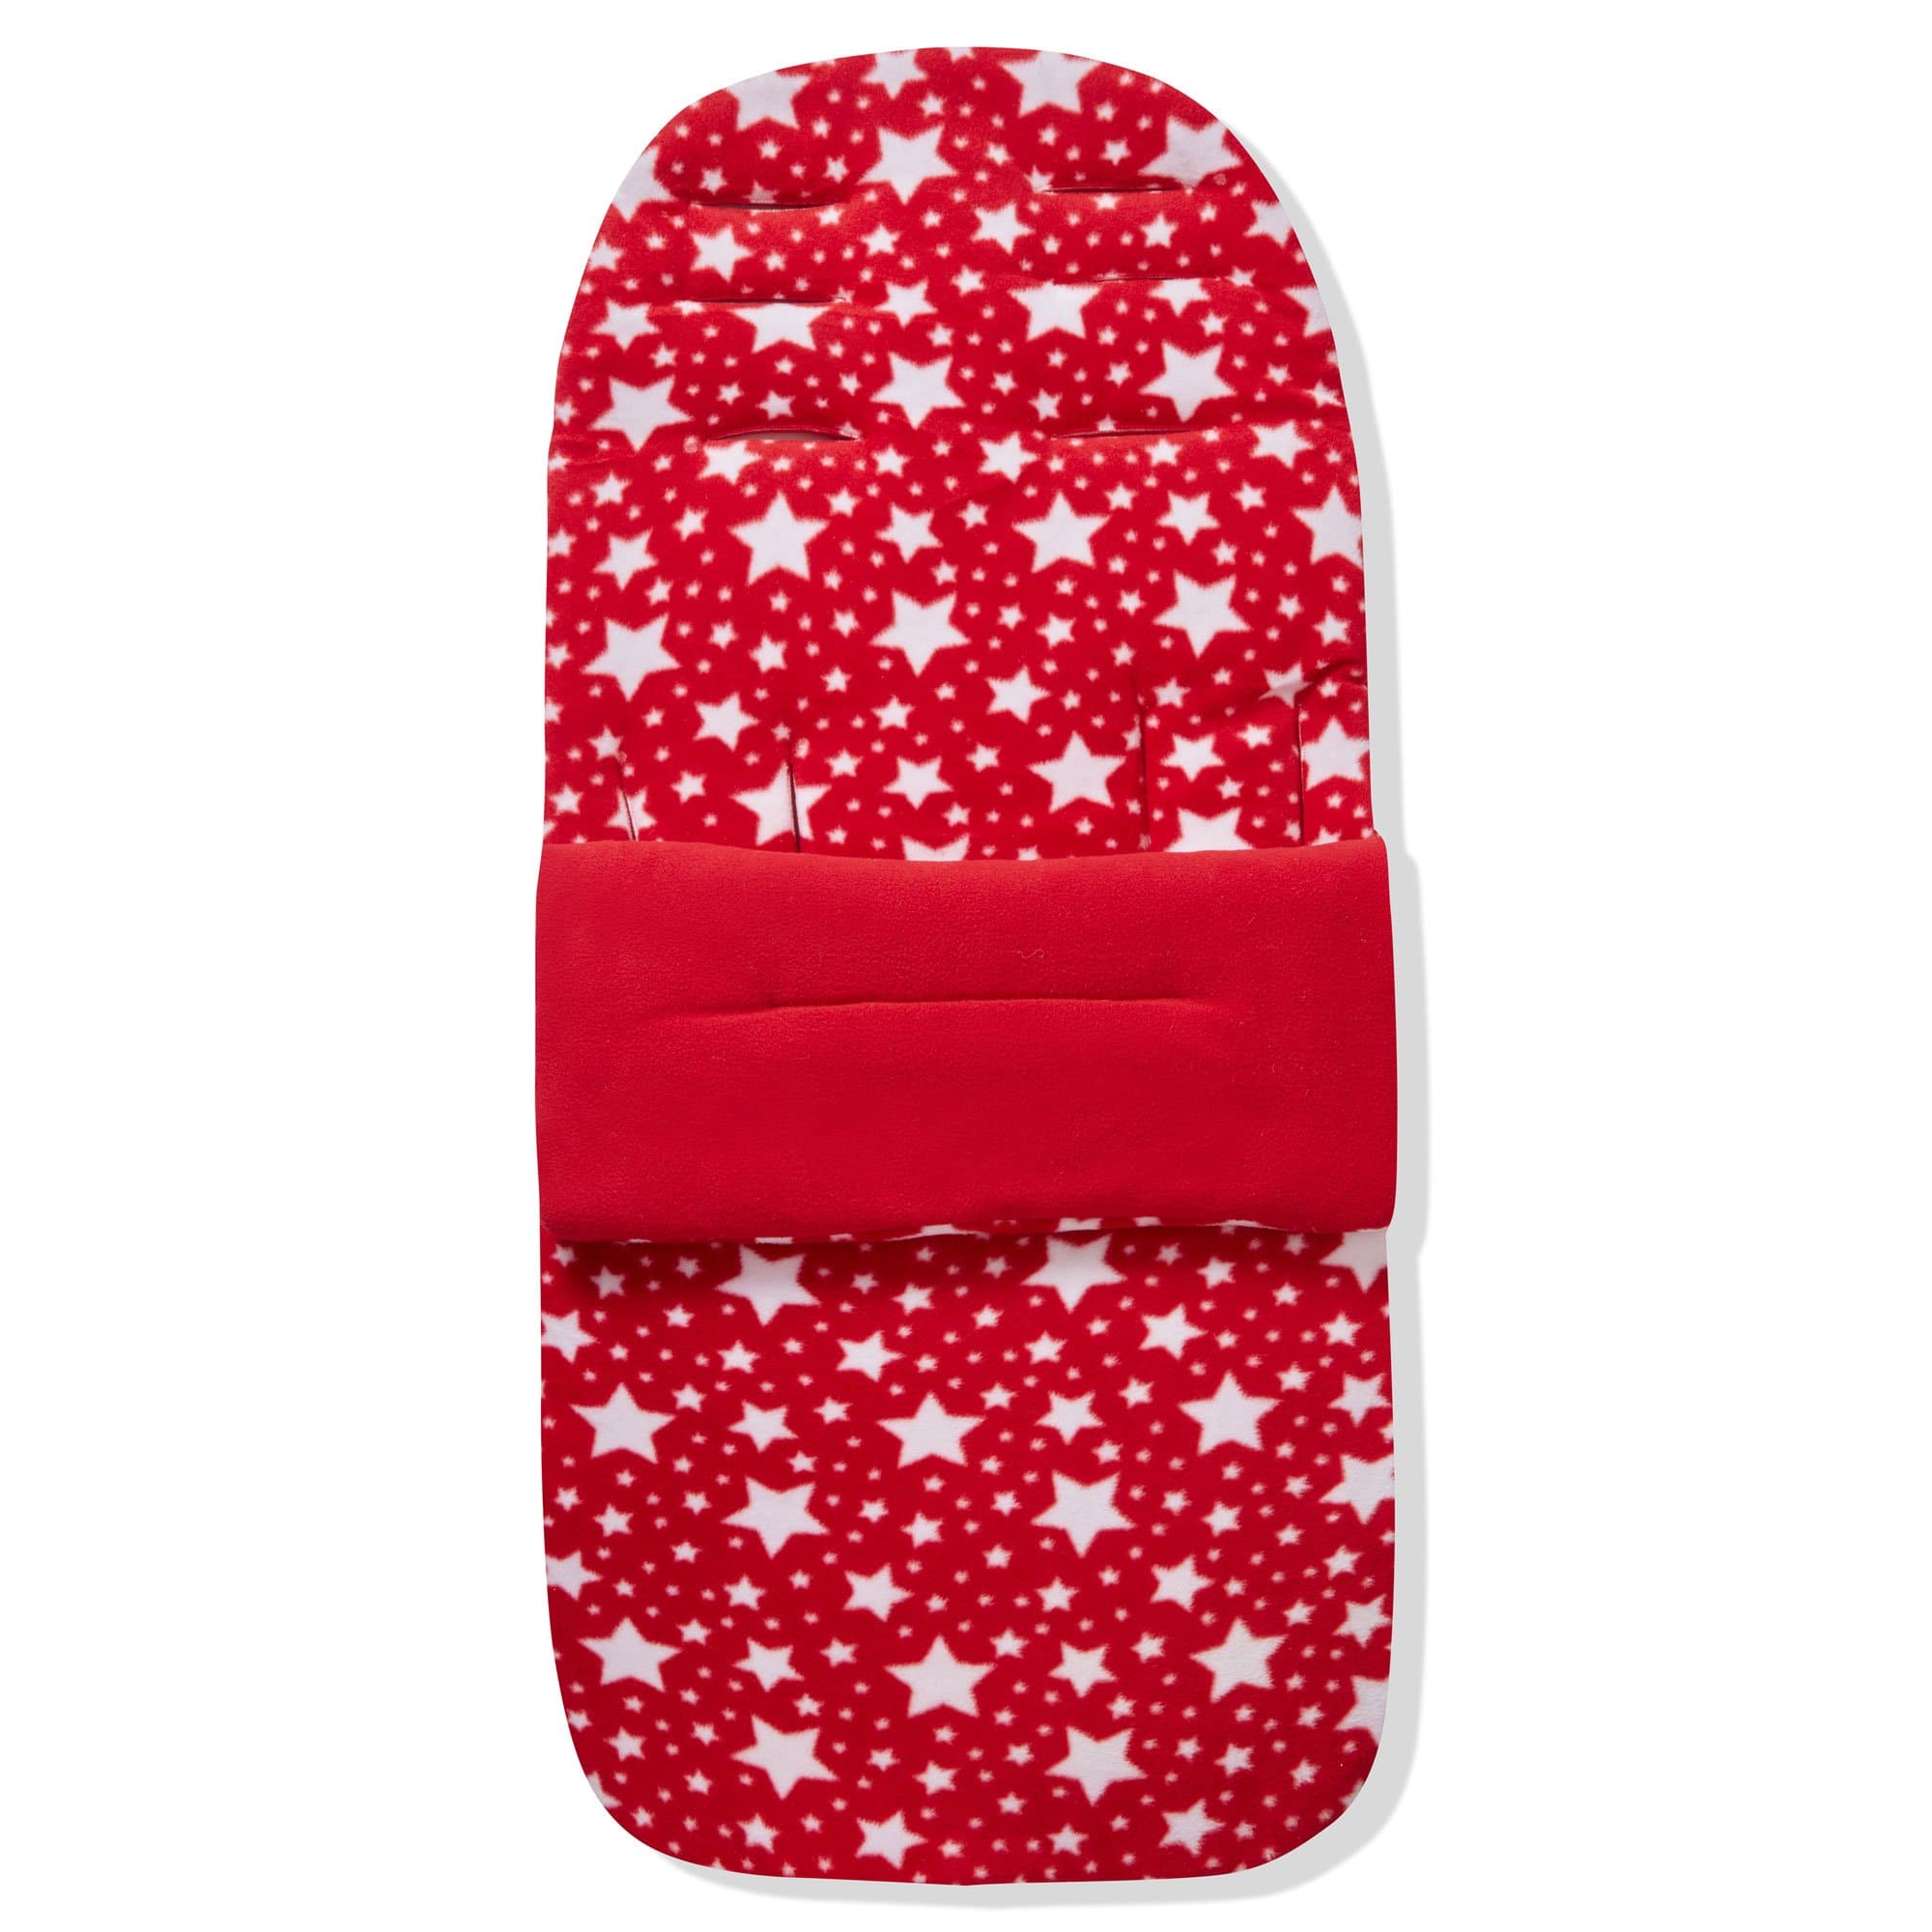 Fleece Footmuff / Cosy Toes Compatible With Baby Jogger - Red Star / Fits All Models | For Your Little One